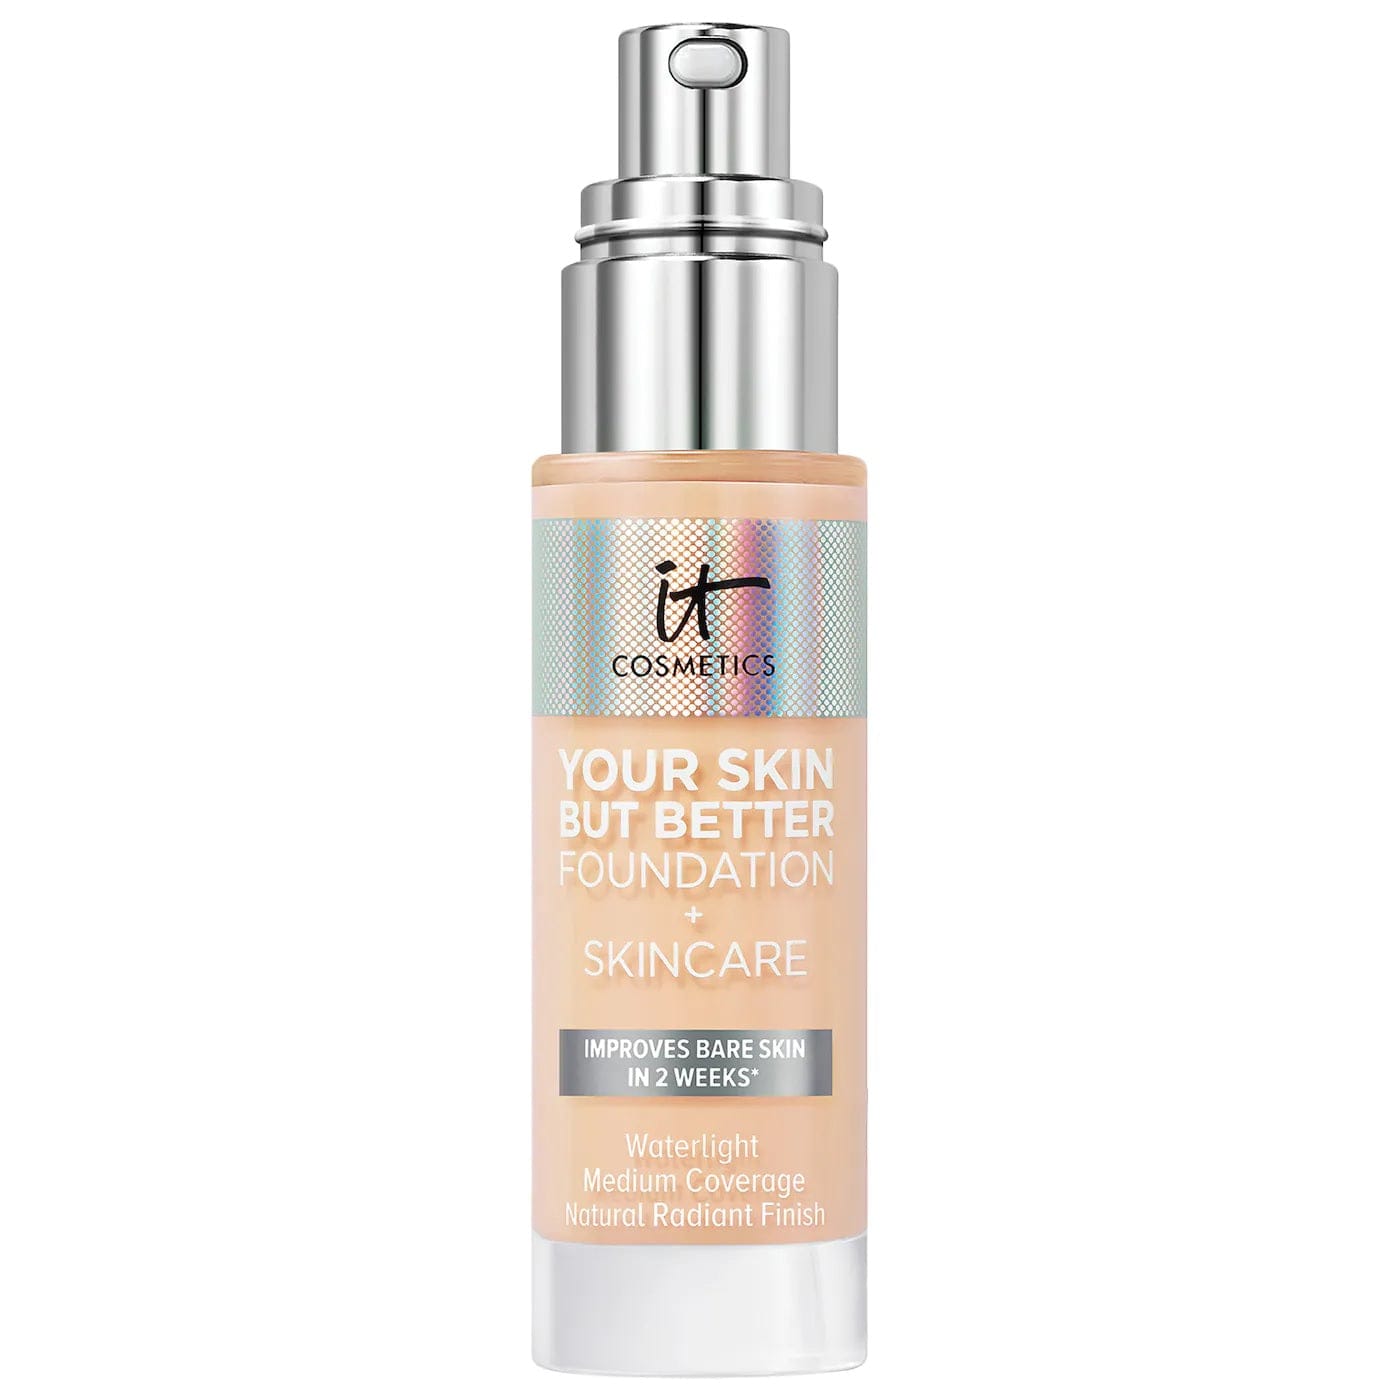 IT COSMETICS Beauty IT Cosmetics Your Skin But Better Foundation and Skincare 30ml - 12 Fair Warm